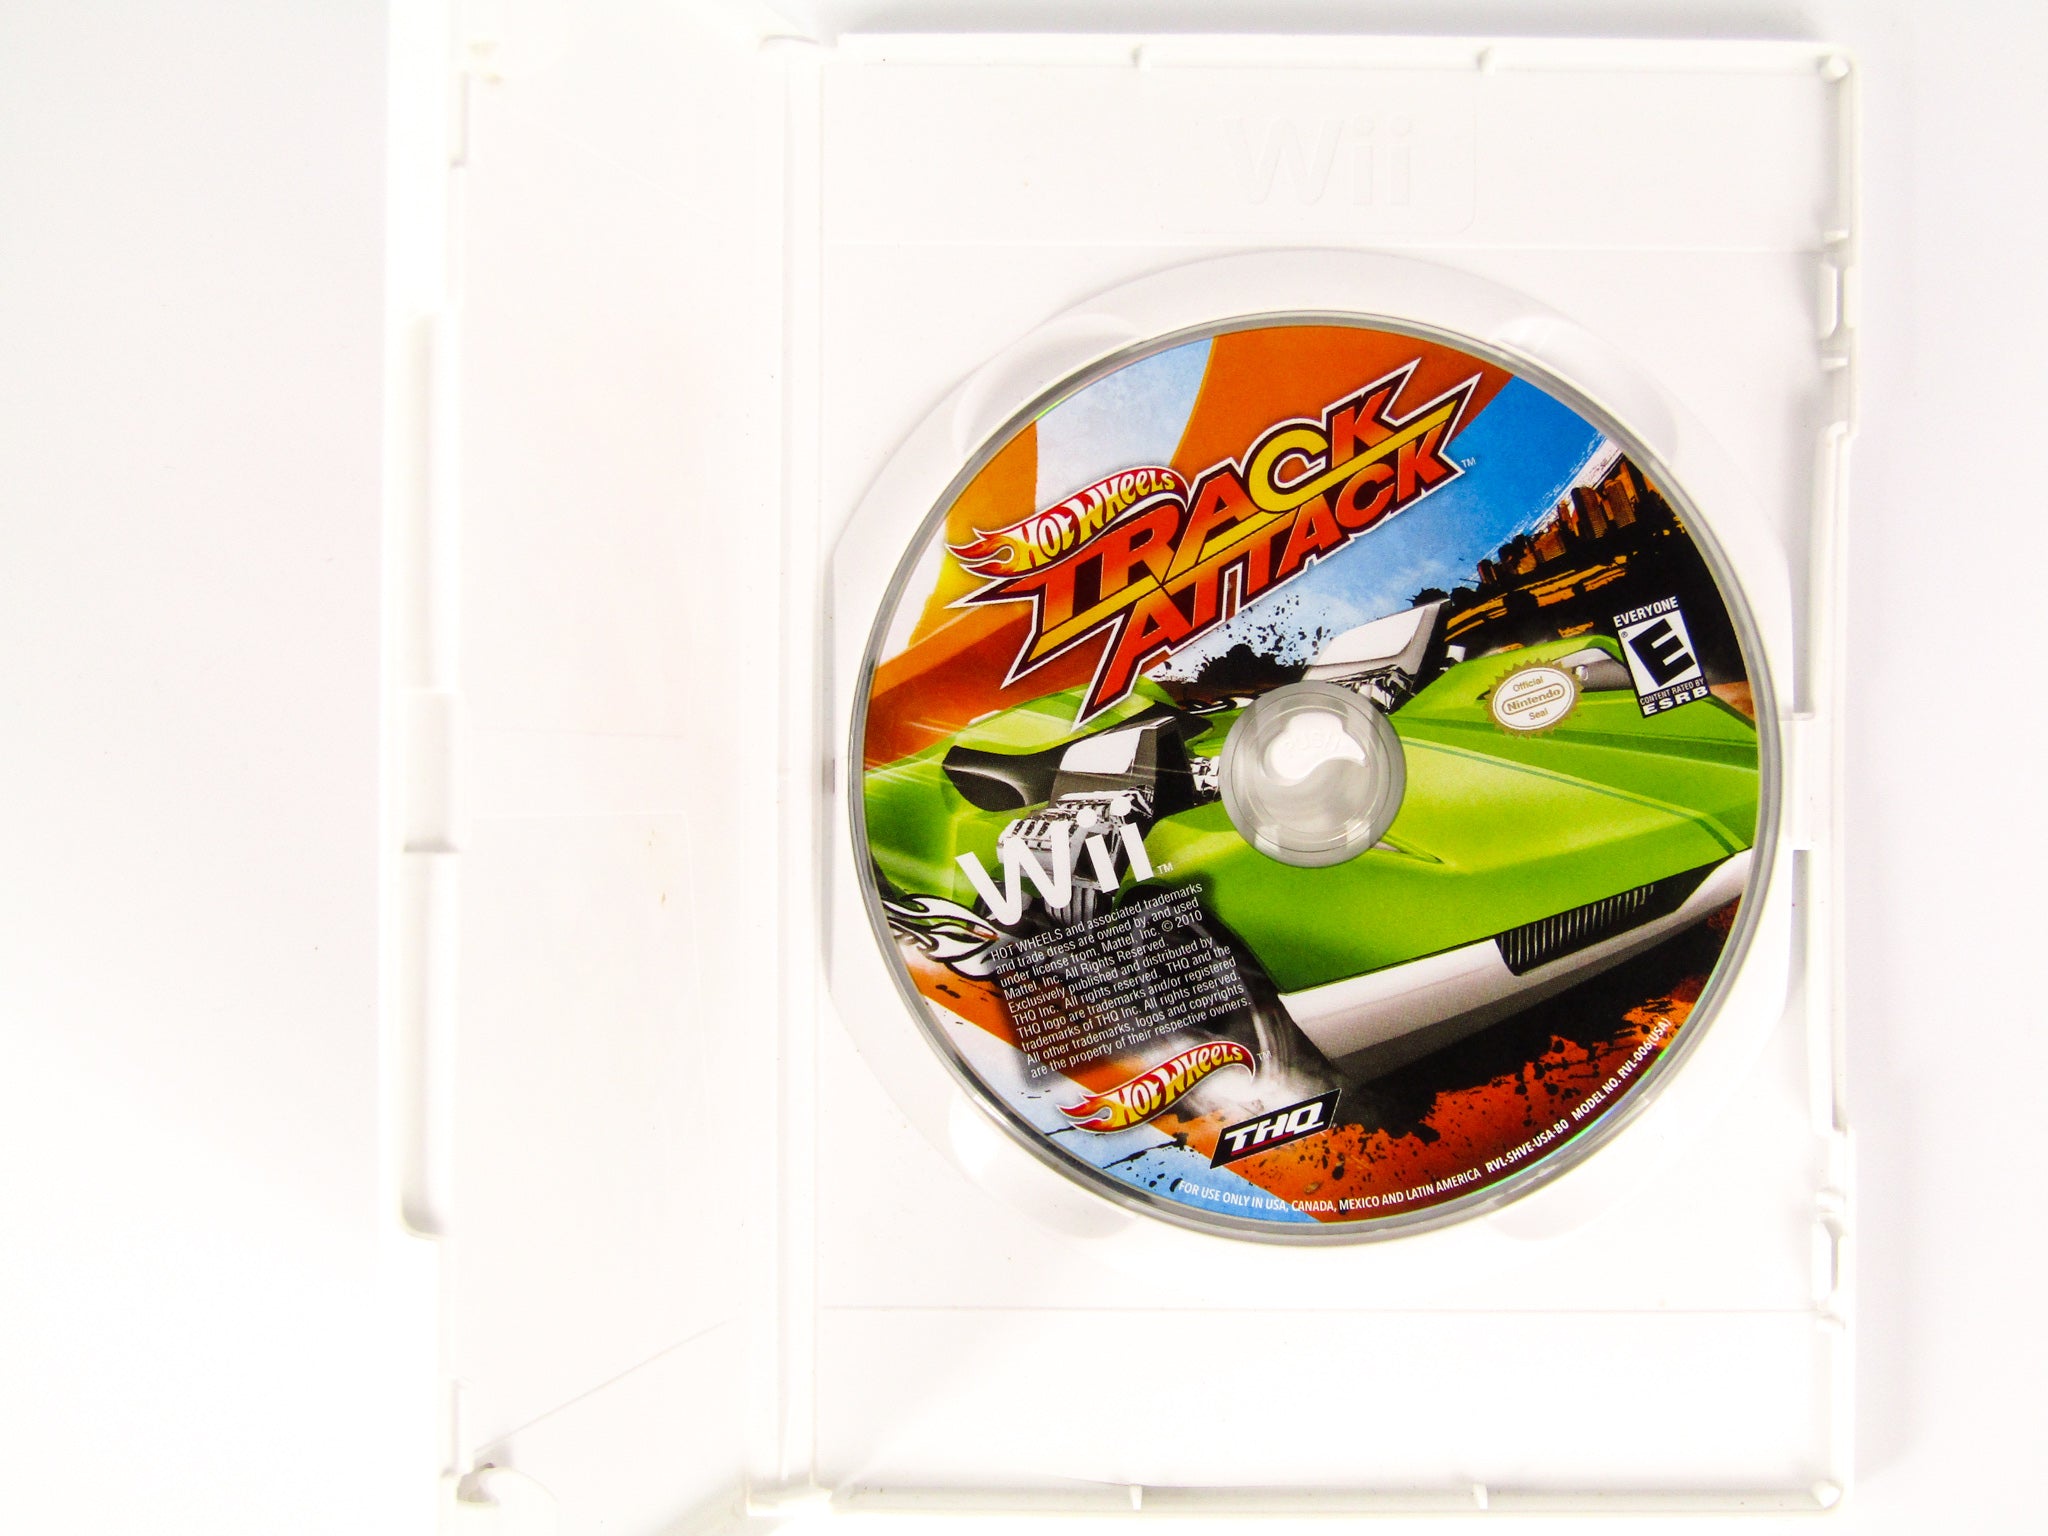 Used Hot wheels Track Attack - Nintendo Wii (Used) 